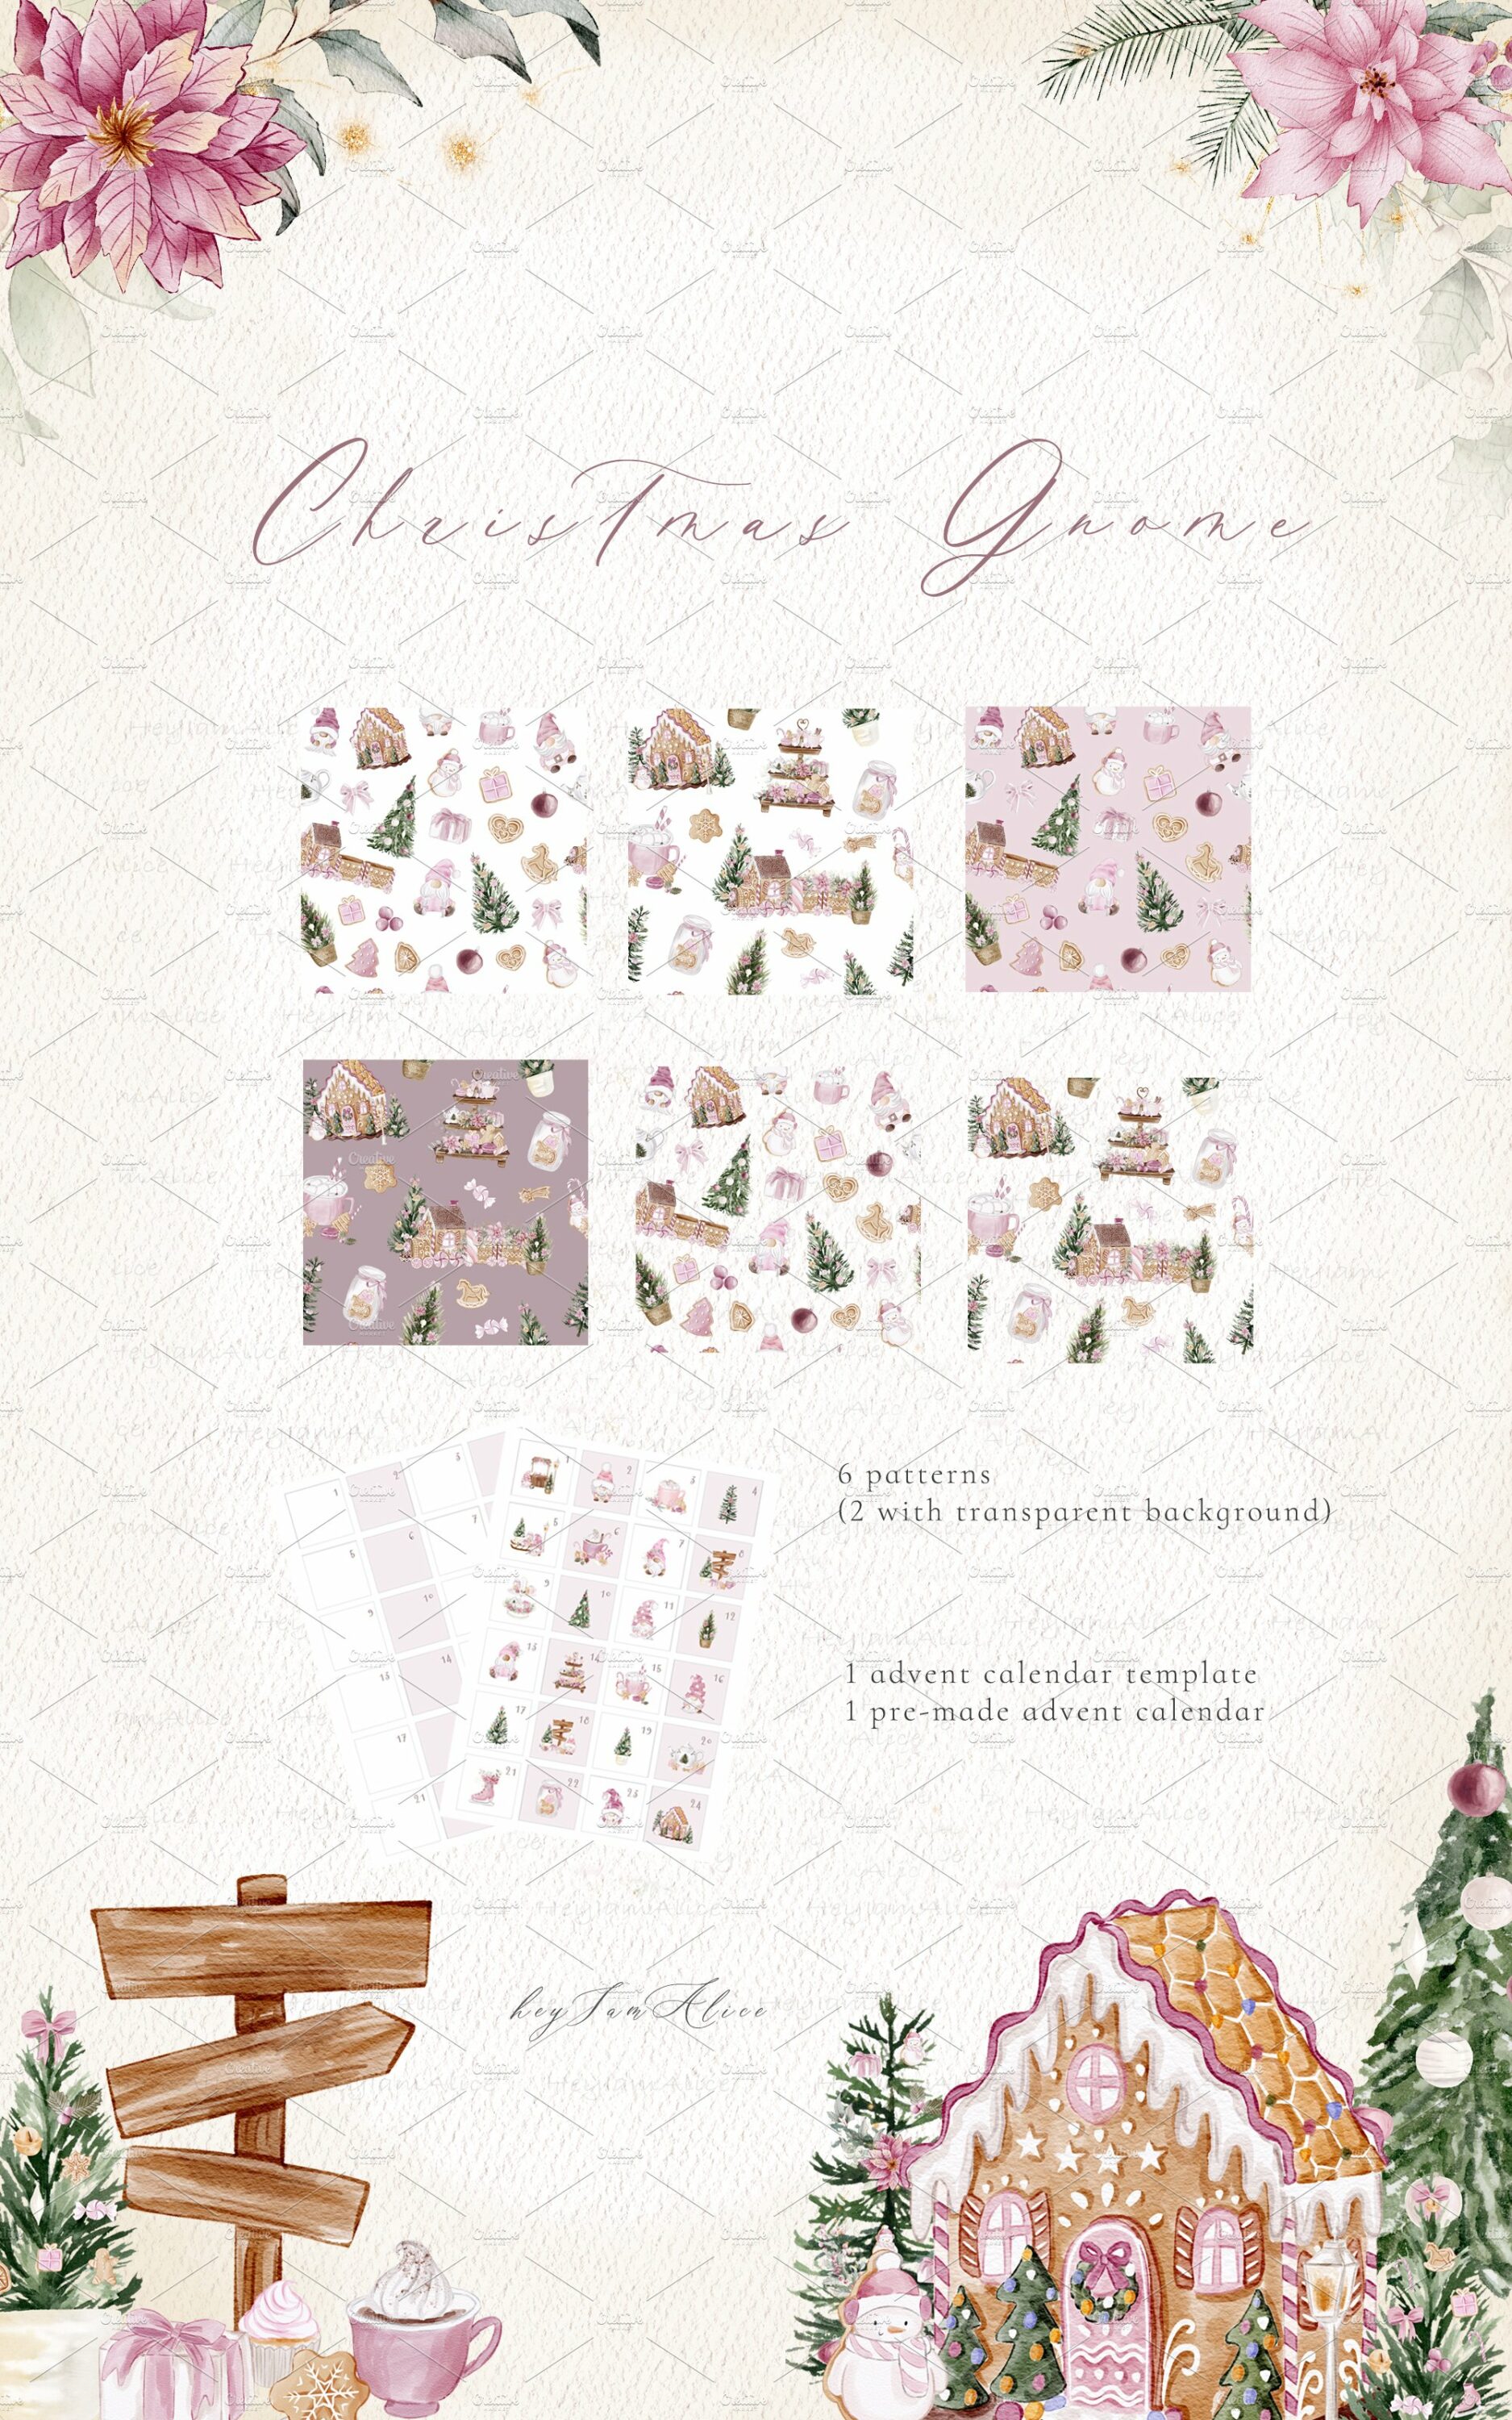 Pastel patterns with Christmas trees, gnomes and festive gifts.